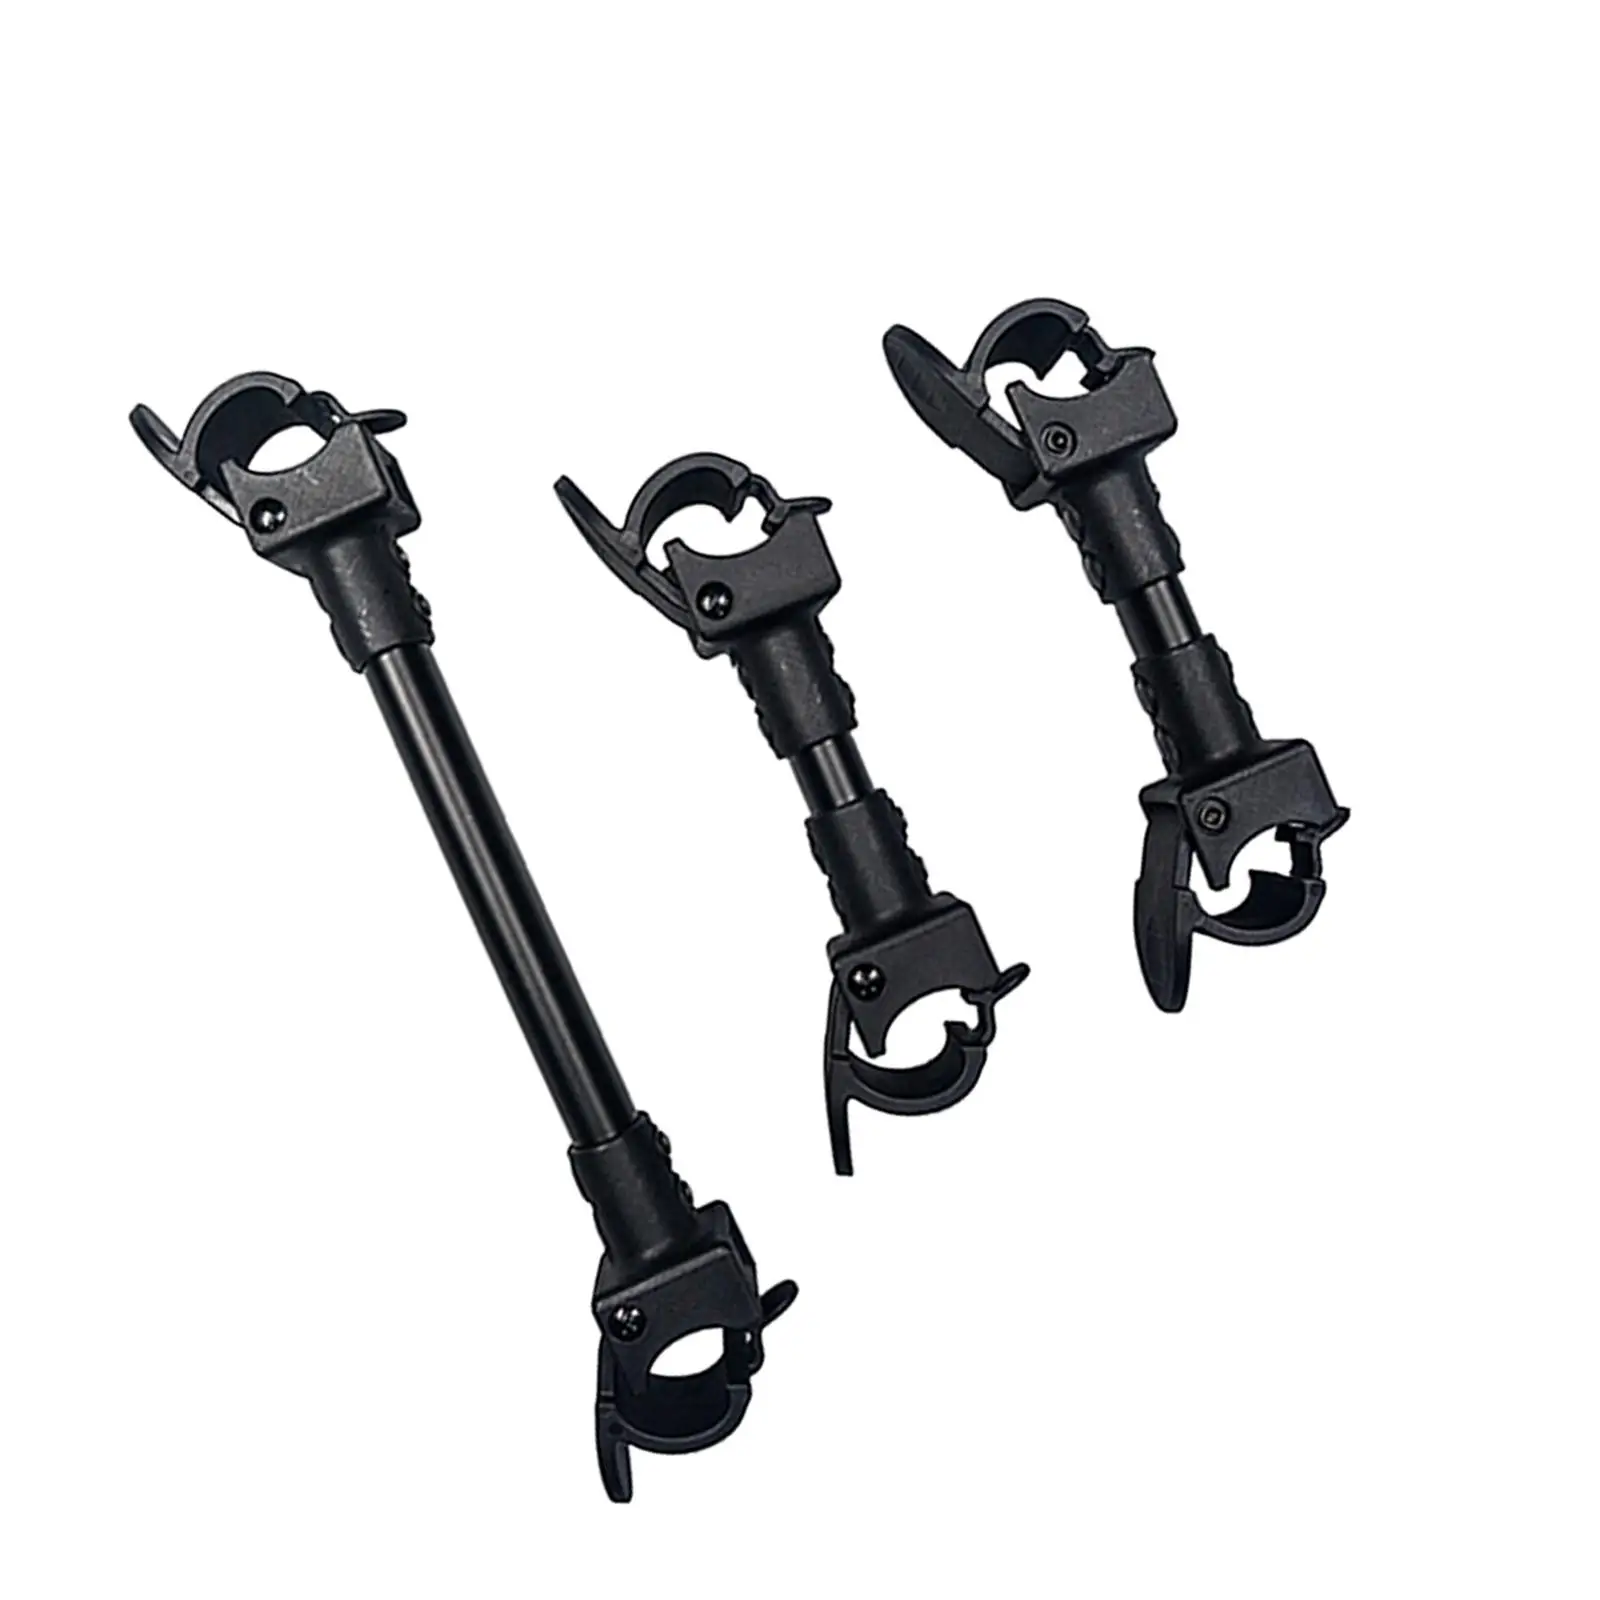 3x Twin Stroller Connector Portable Black Attachment Double Umbrella Side by Side Safety Secure Strap Durable for Babyzen Cart